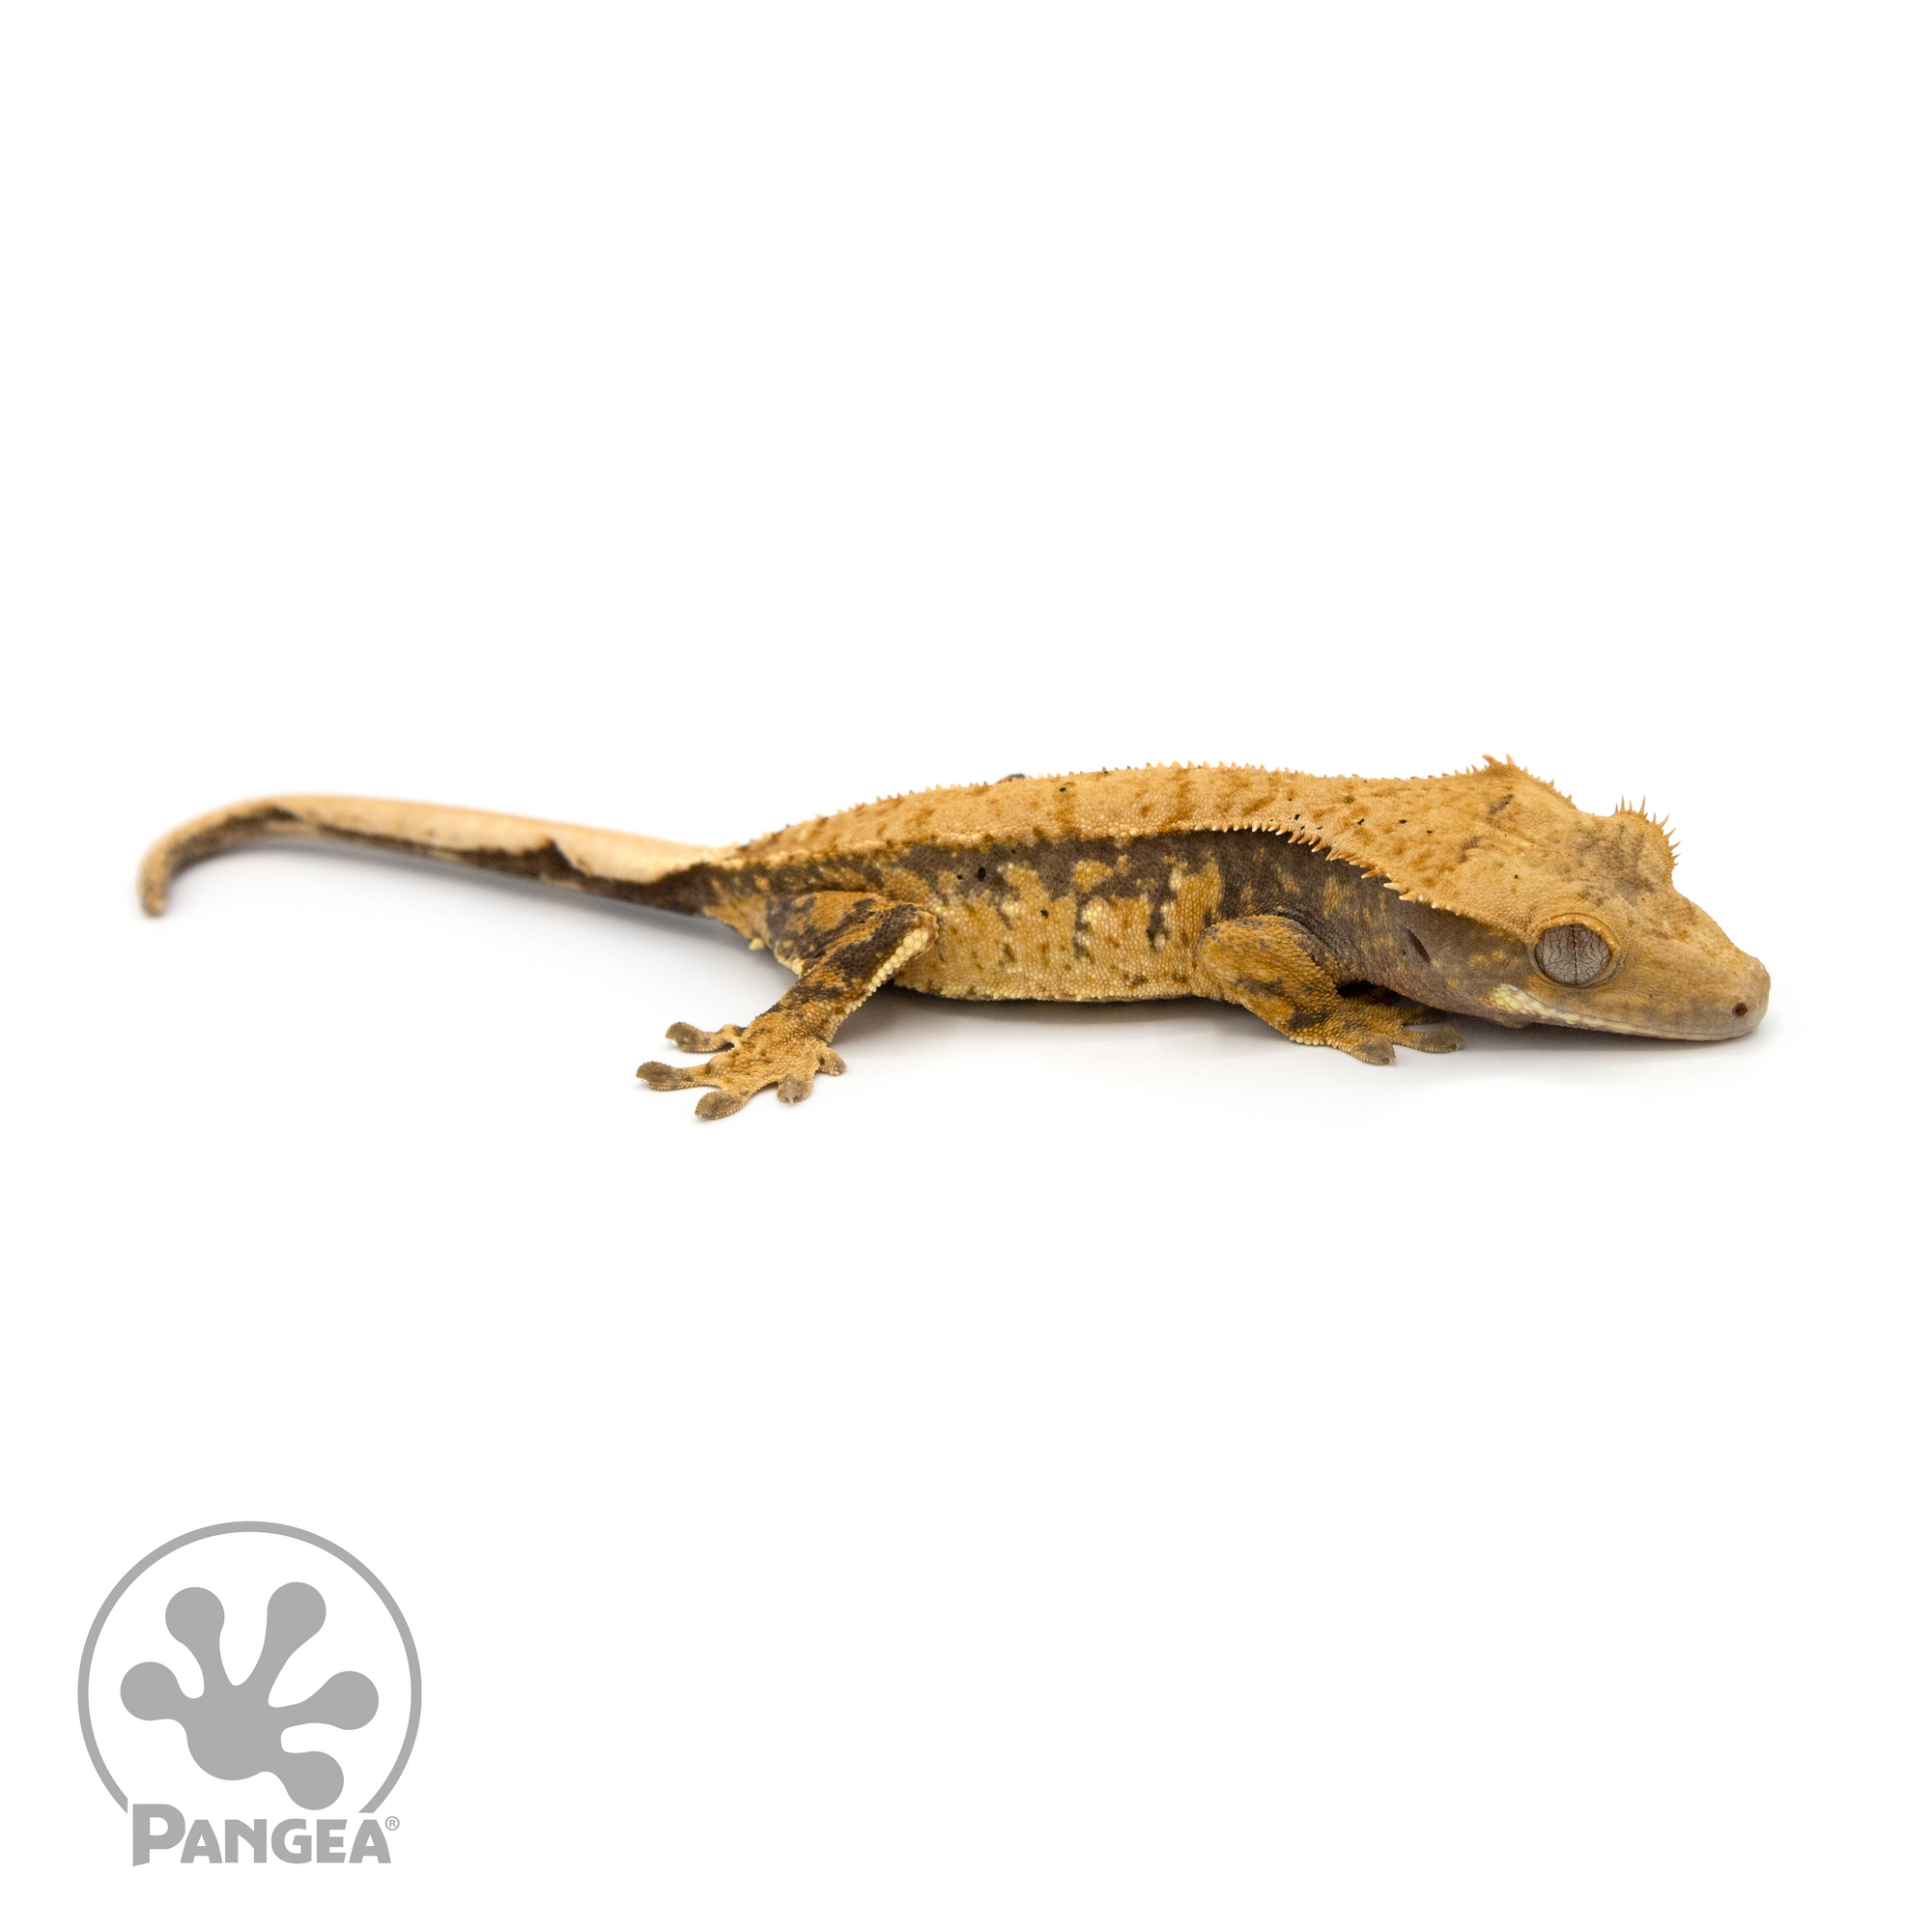 Female Extreme Harlequin Crested Gecko Cr-1127 looking right 